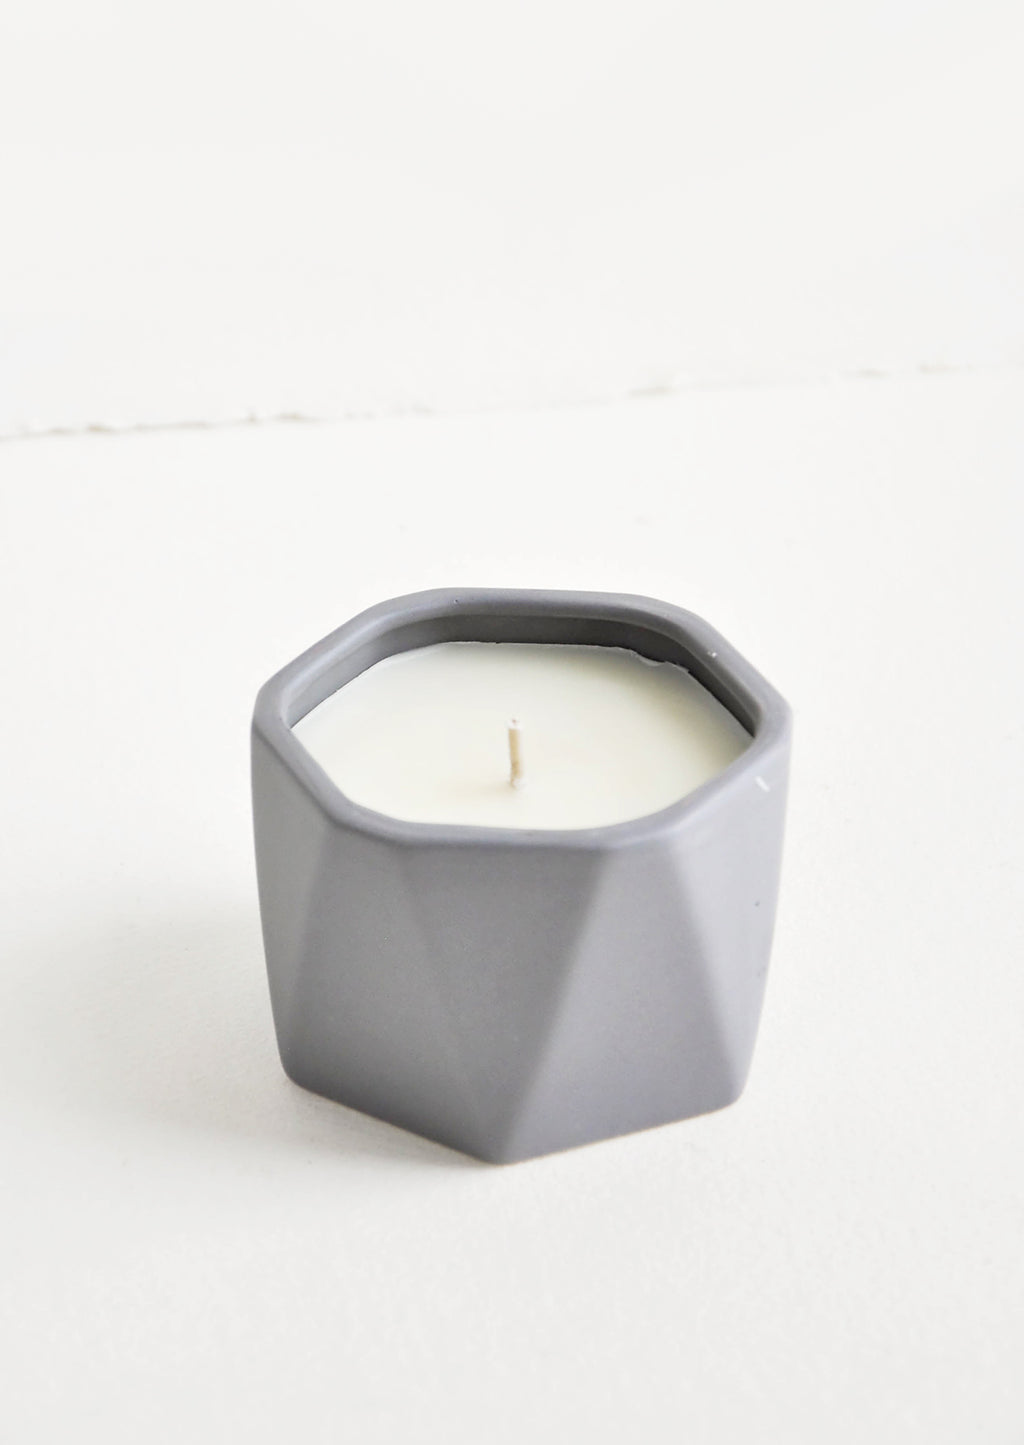 Blackberry Absinthe: A small candle in dark grey faceted ceramic vessel.